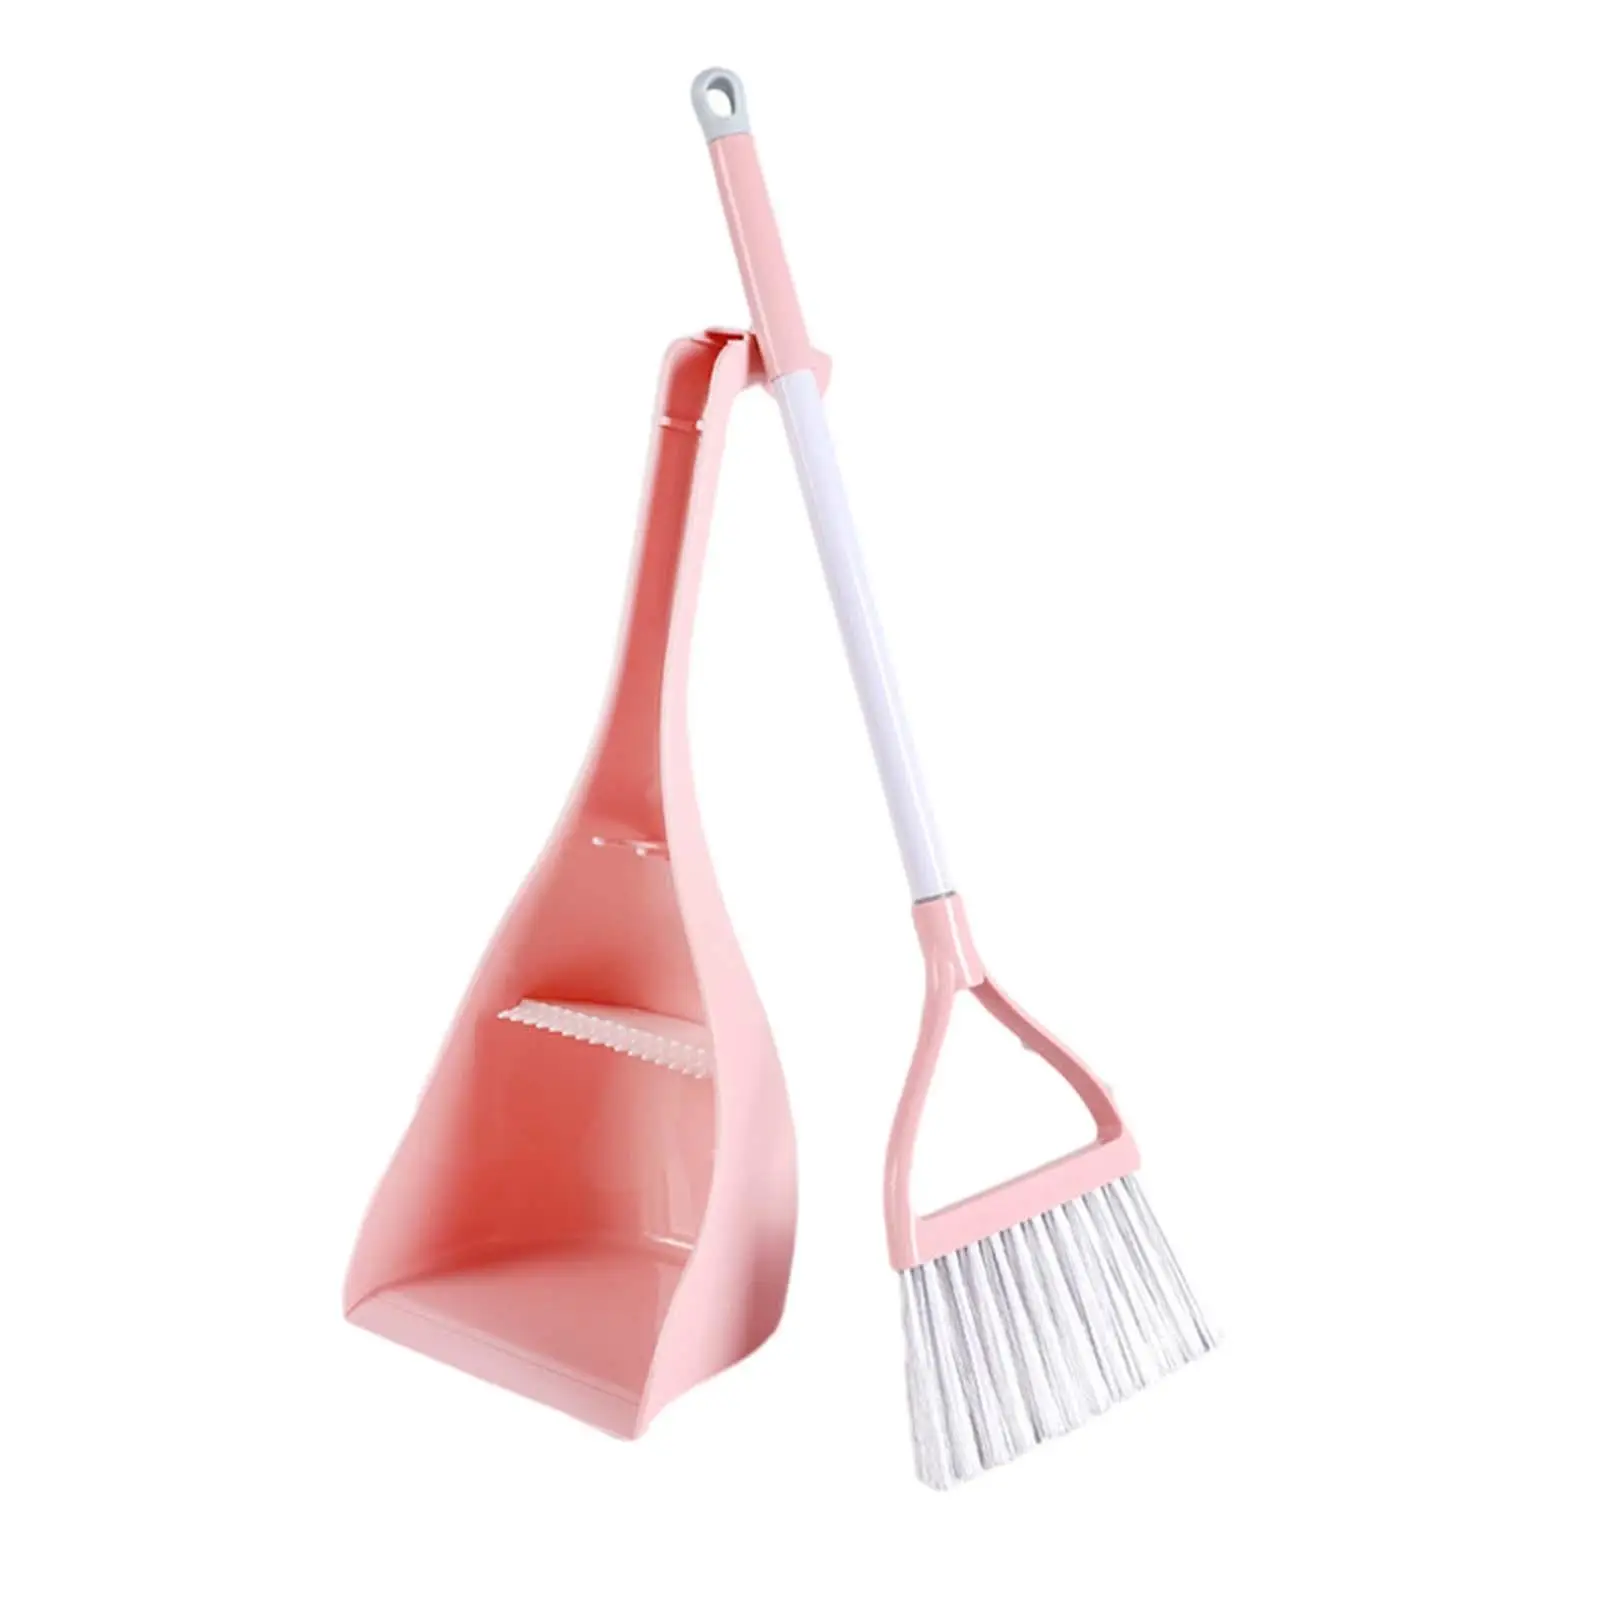 Mini Kids Broom and Dustpan Set Early Learning Birthday Gifts Housekeeping Play Set for Ages 3-6 Kindergarten Boys Girls